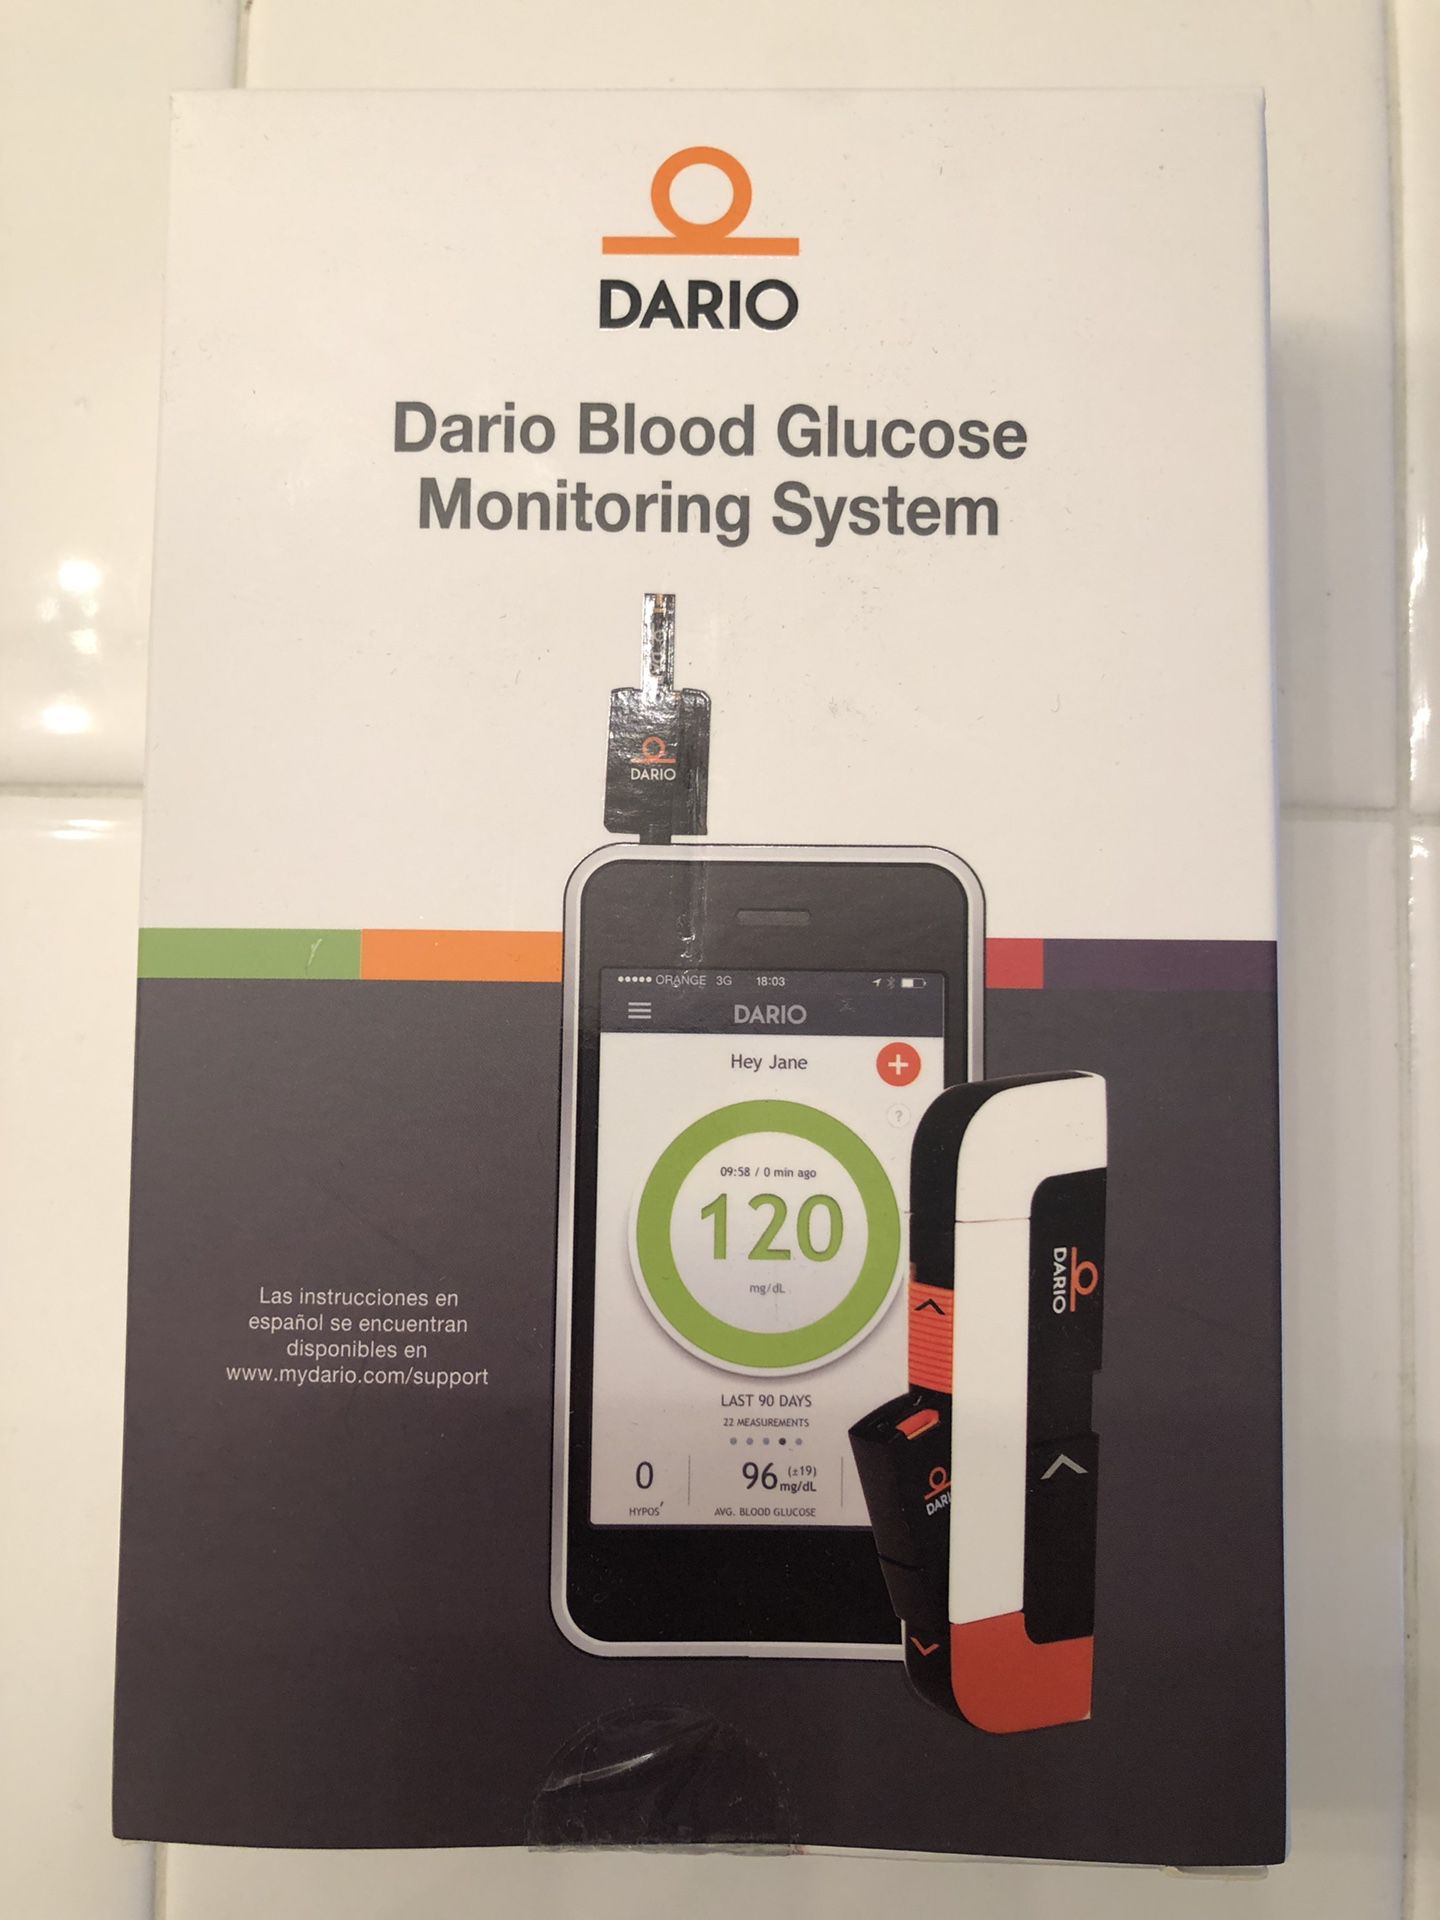 DARIO Blood Glucose Meter for use with I-Phone, Glucose Testing, Diabetes, Diagnostics